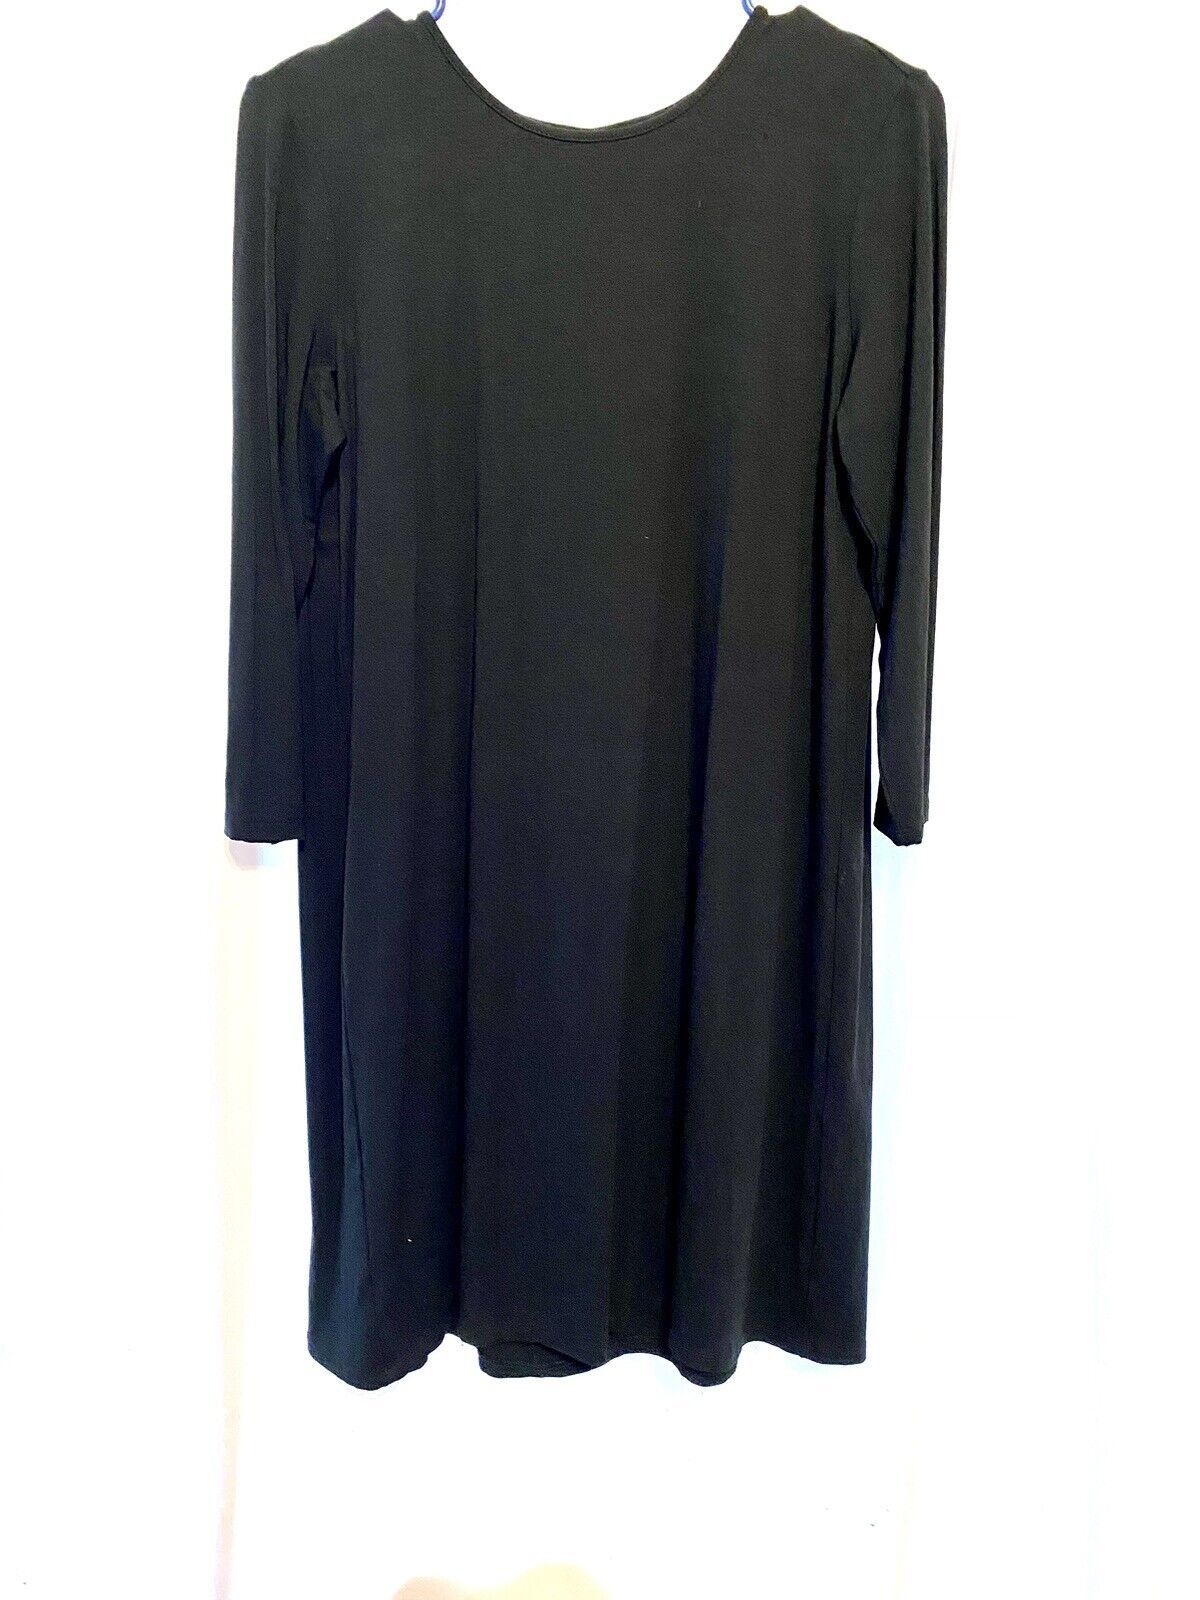 Primary image for J Jill Womens Size XS Classy Black Dress Stretch Casual Comfort Rayon Blend